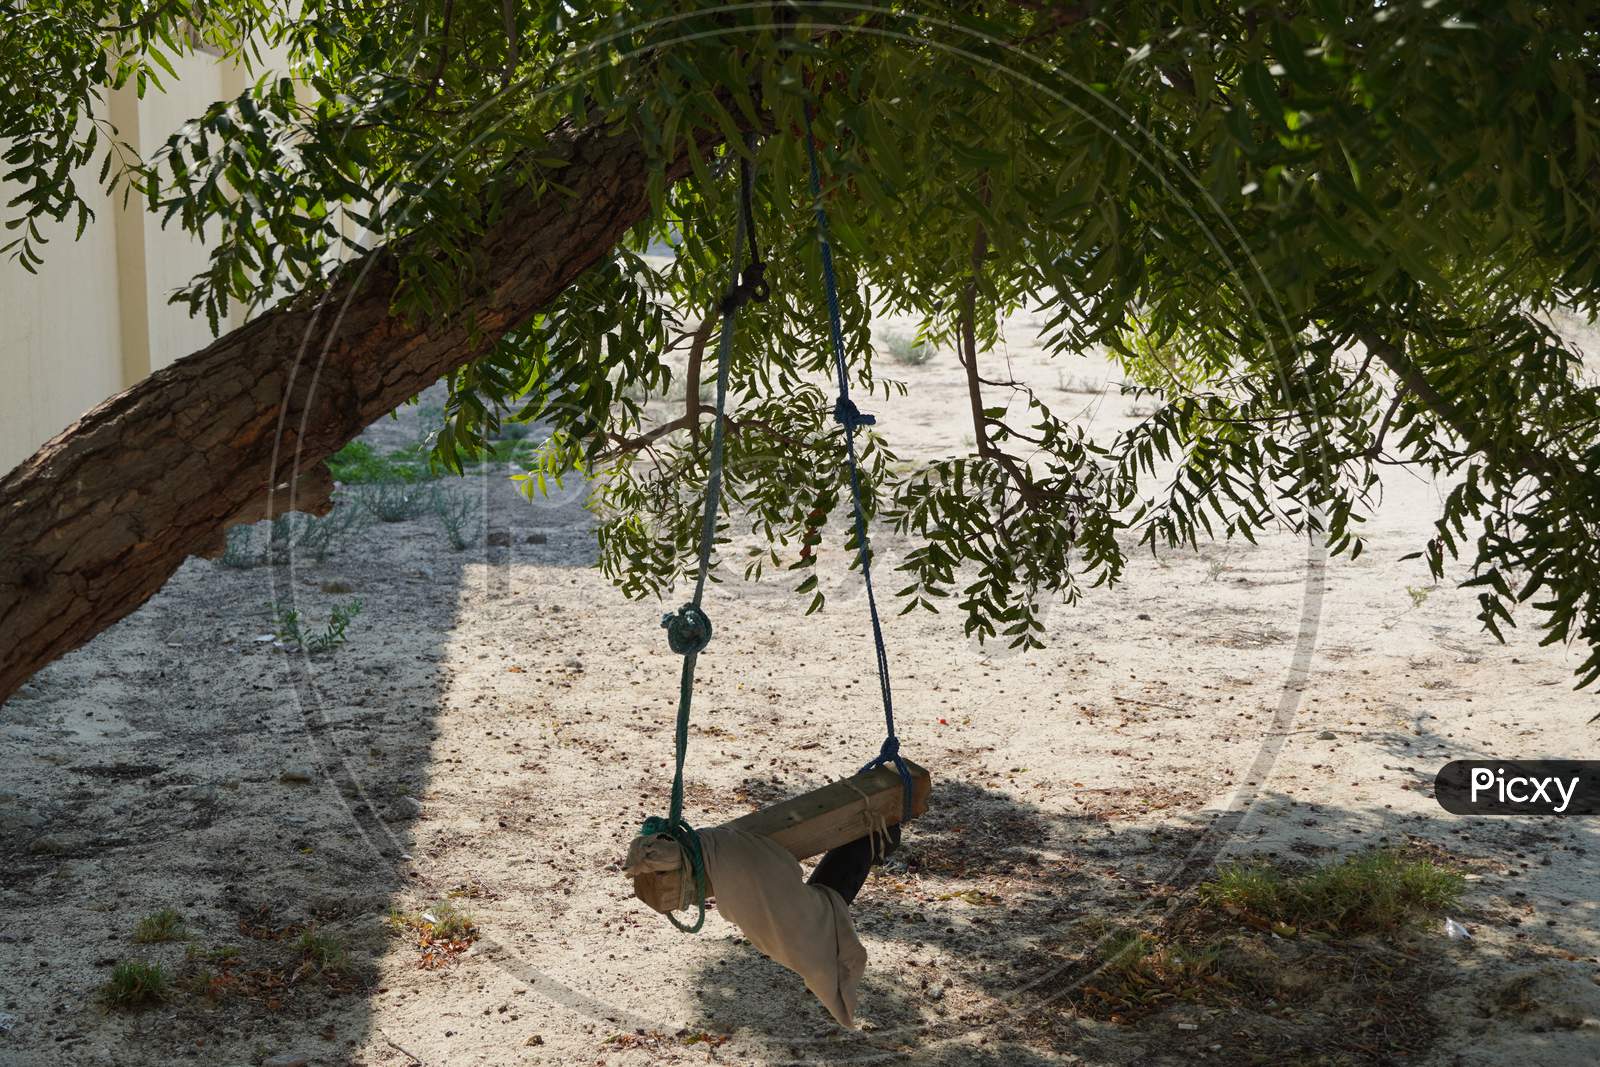 A Dirty Children Tree Swing. Wooden Swing Still Under The Trees In The Fall Leaves And Winter. Wooden Swing On Ropes Under The Big Tree In A Shaded Sandy Area.